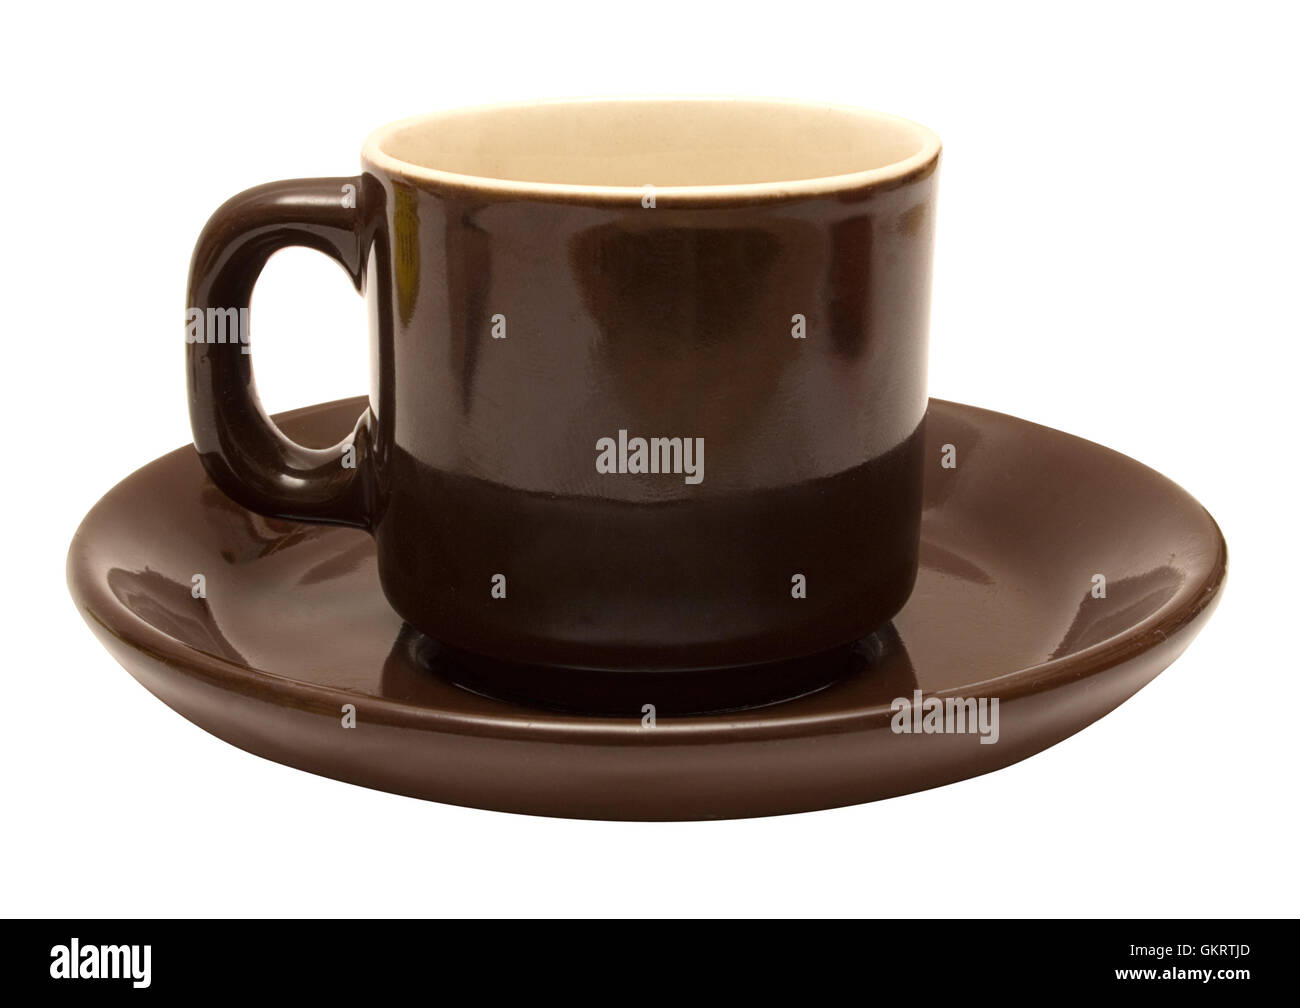 https://c8.alamy.com/comp/GKRTJD/brown-espresso-cup-with-clipping-path-GKRTJD.jpg